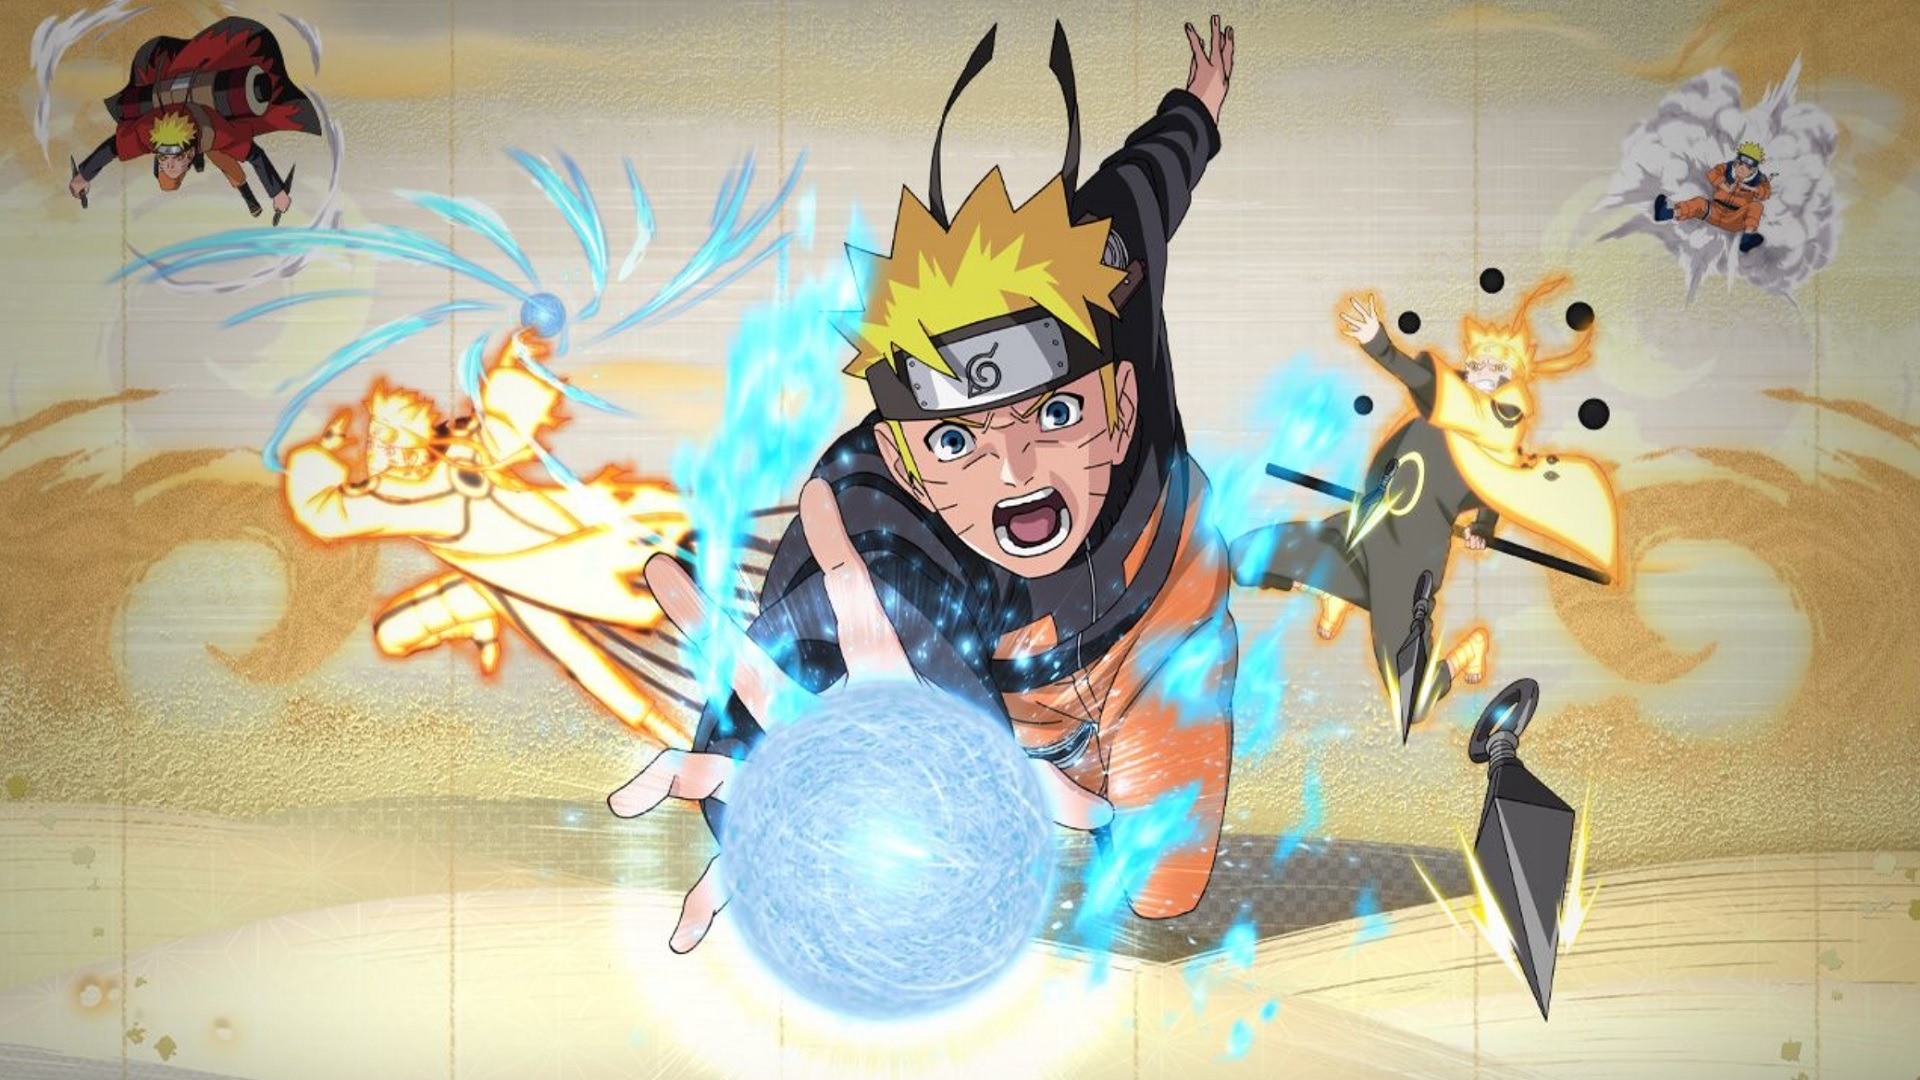 Naruto X Boruto Ultimate Ninja Storm Connections could be released